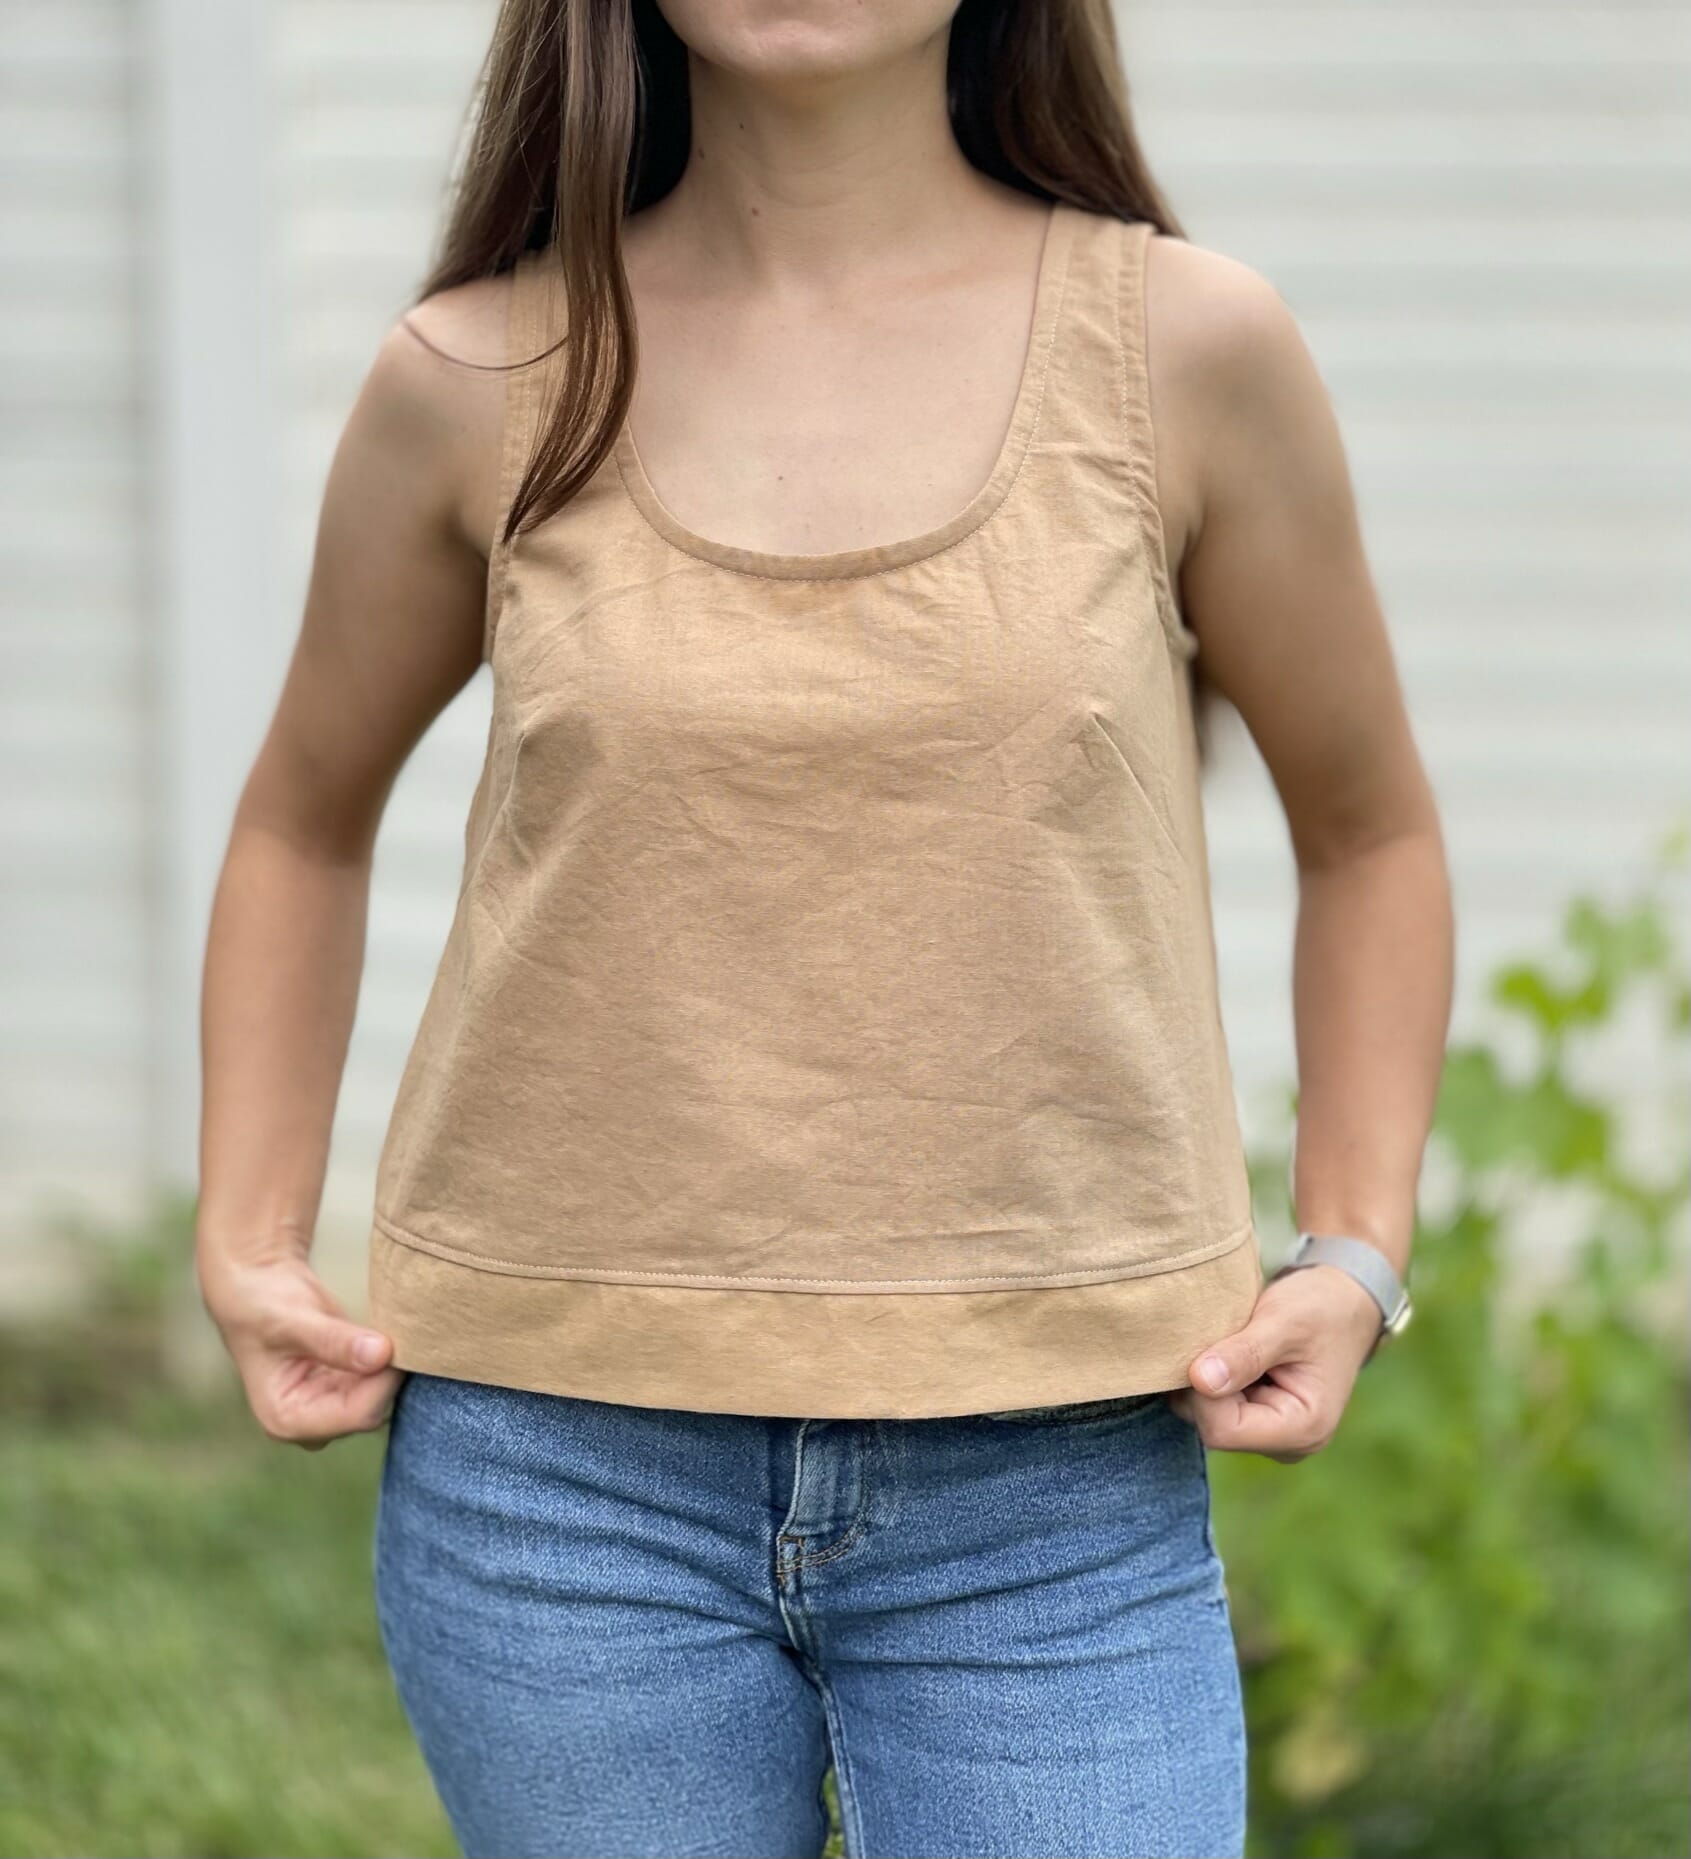 DIY simple woven top - easy pattern hack - I Can Sew This